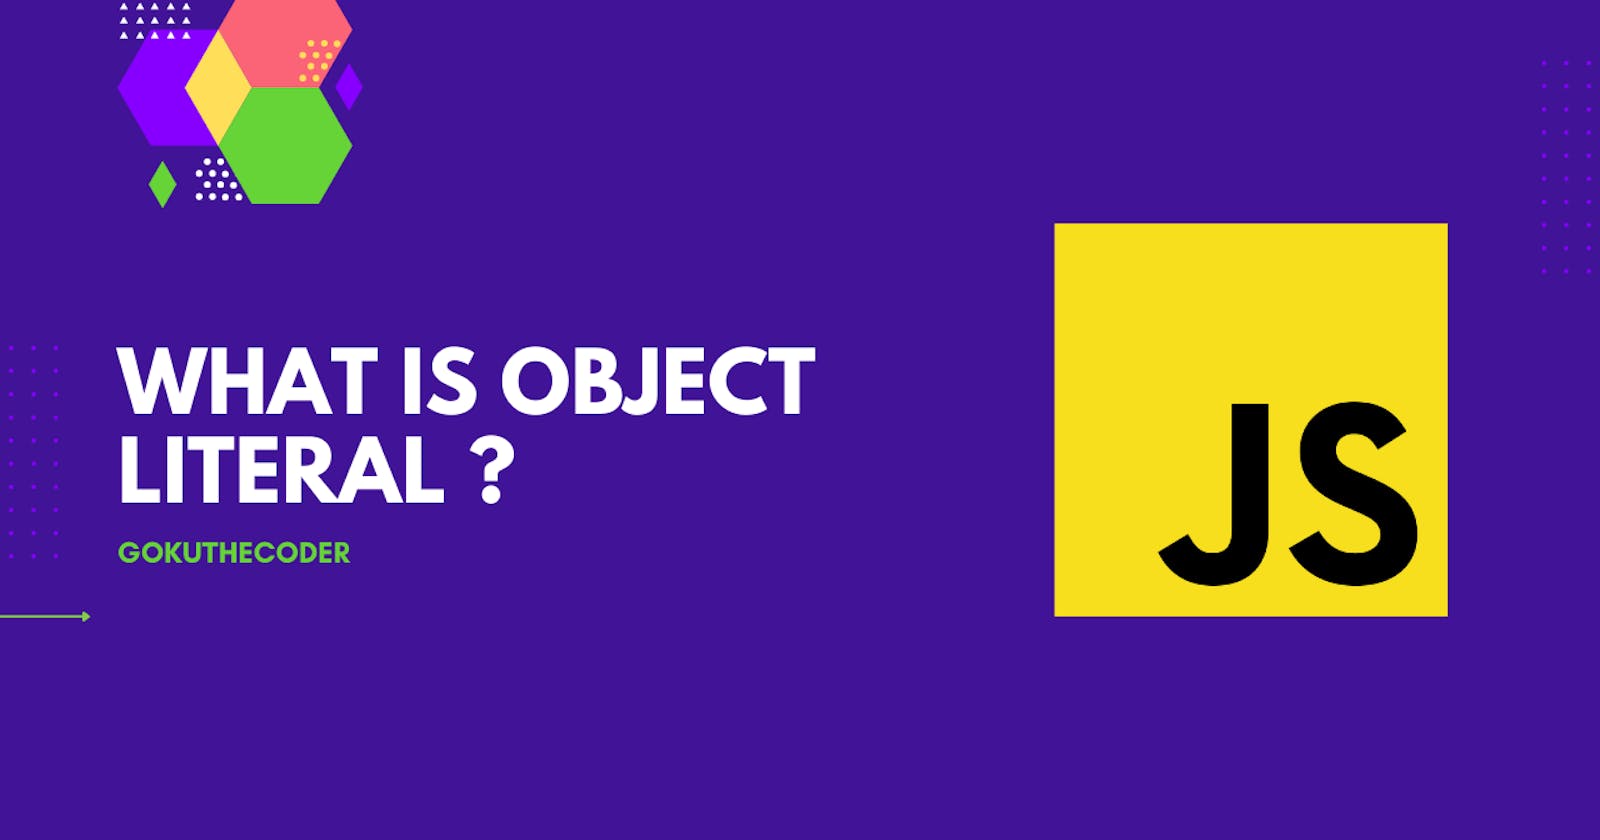 What is object literal ?